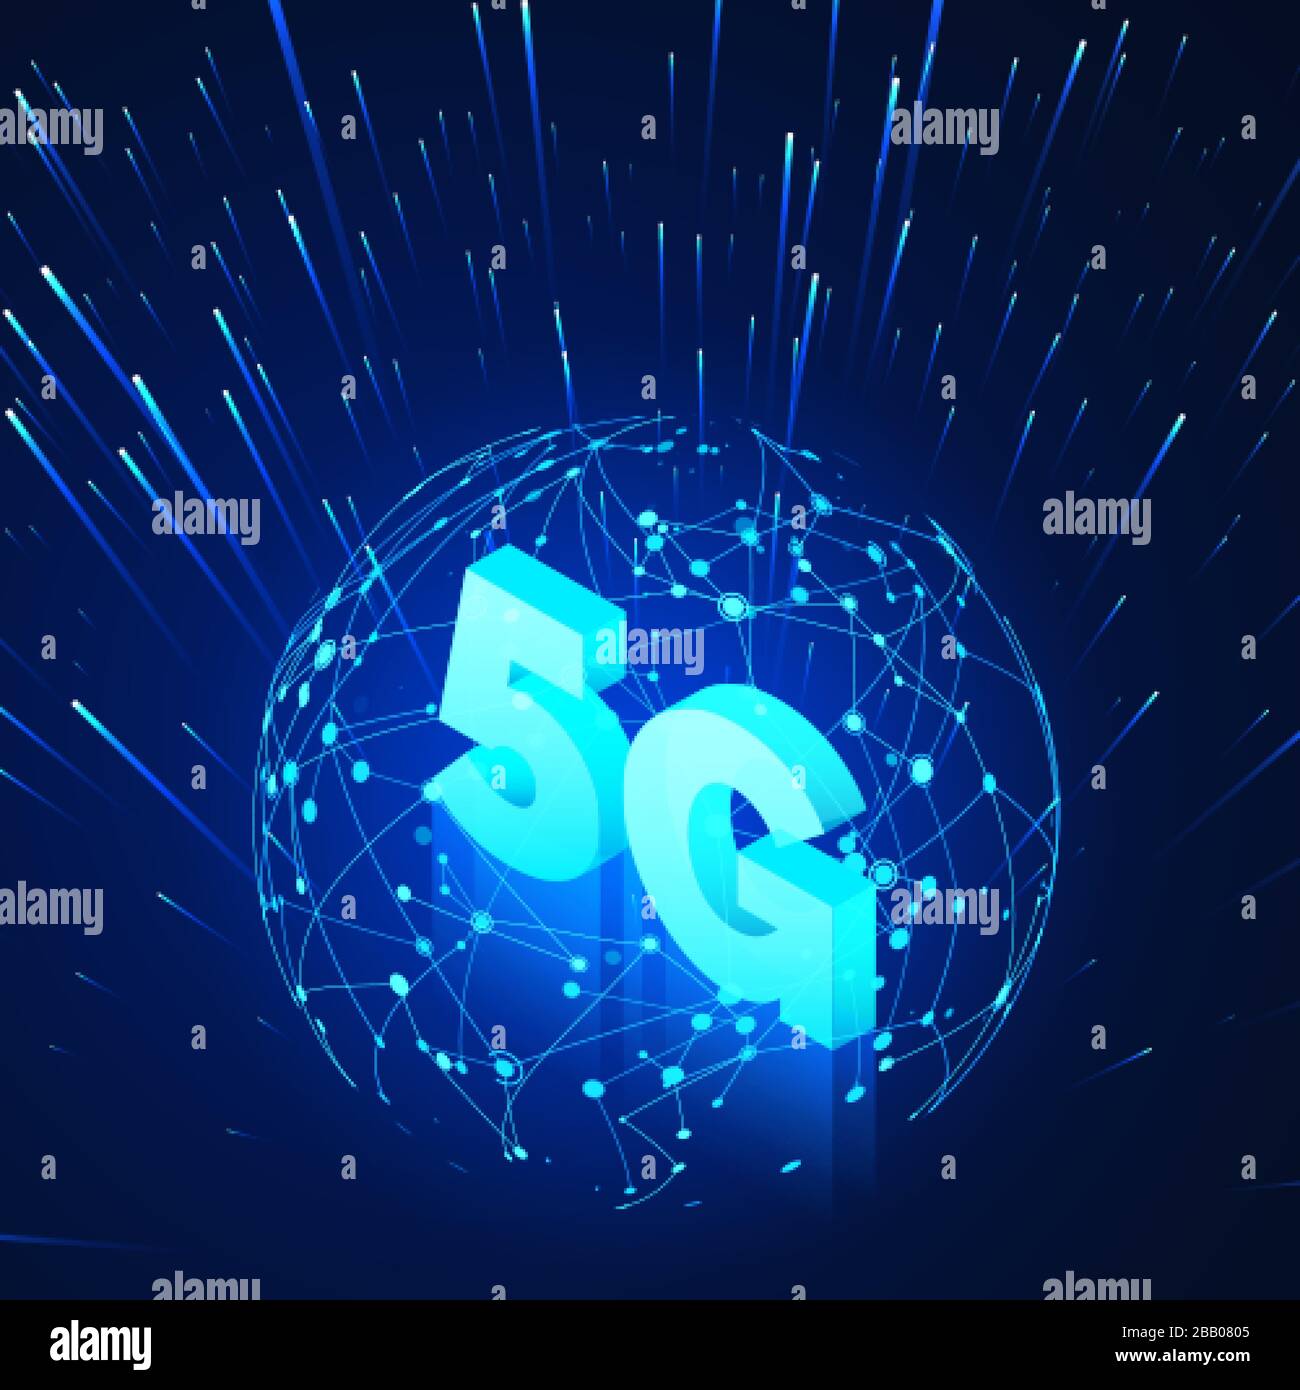 High speed 5G global mobile networks. Business isometric illustration global network hologram and text 5g. Modern data transfer technology. Wireless w Stock Vector